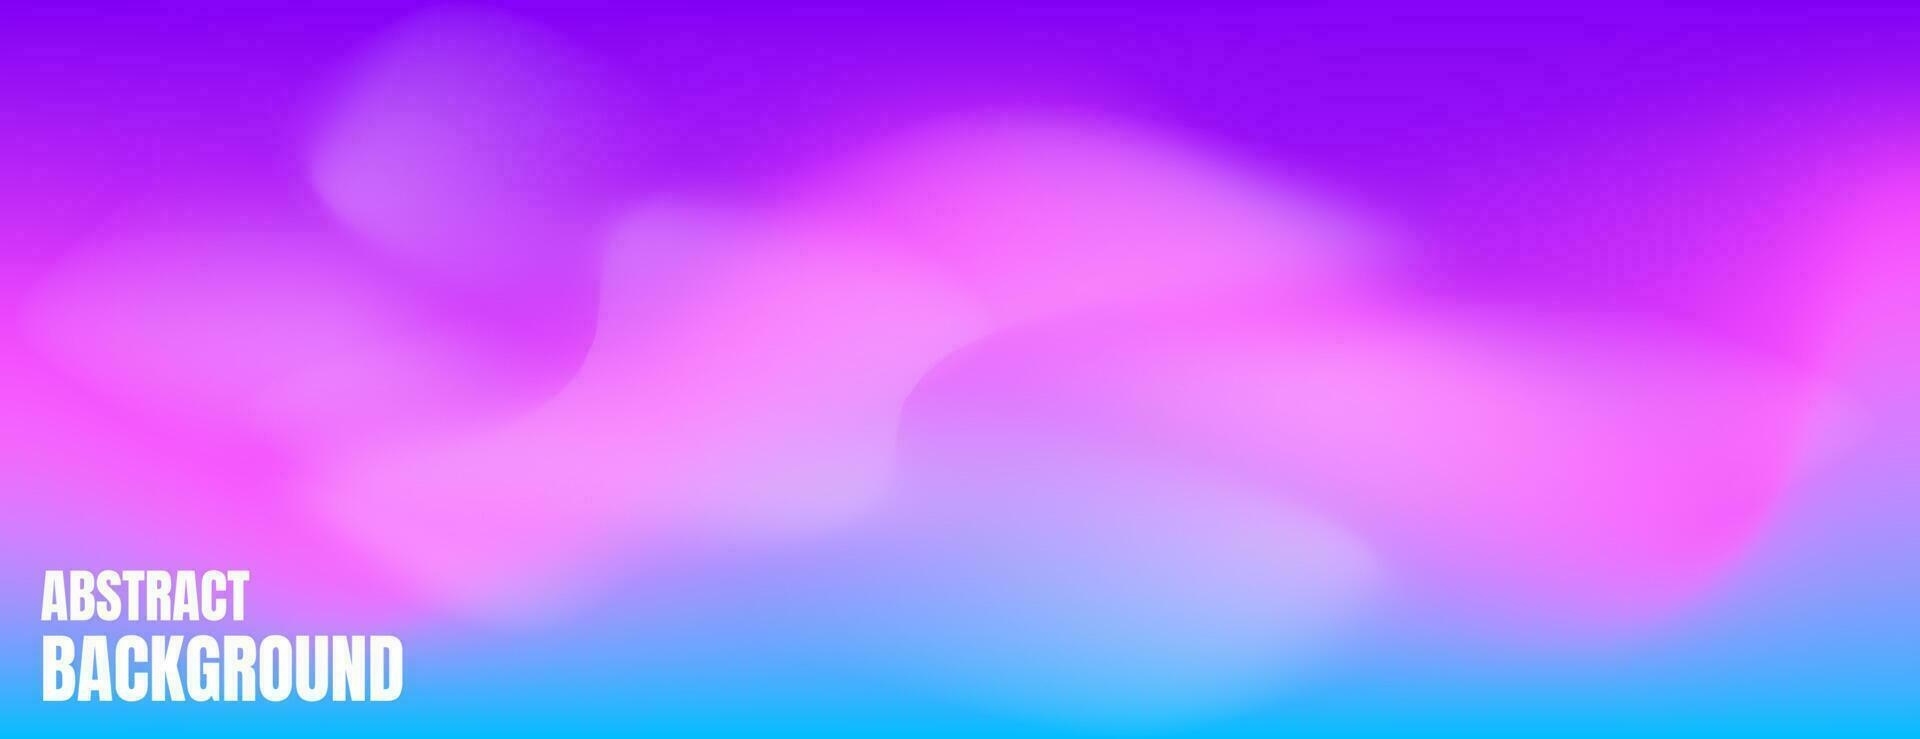 pink,blue and purple out of focus abstract background with fog vector